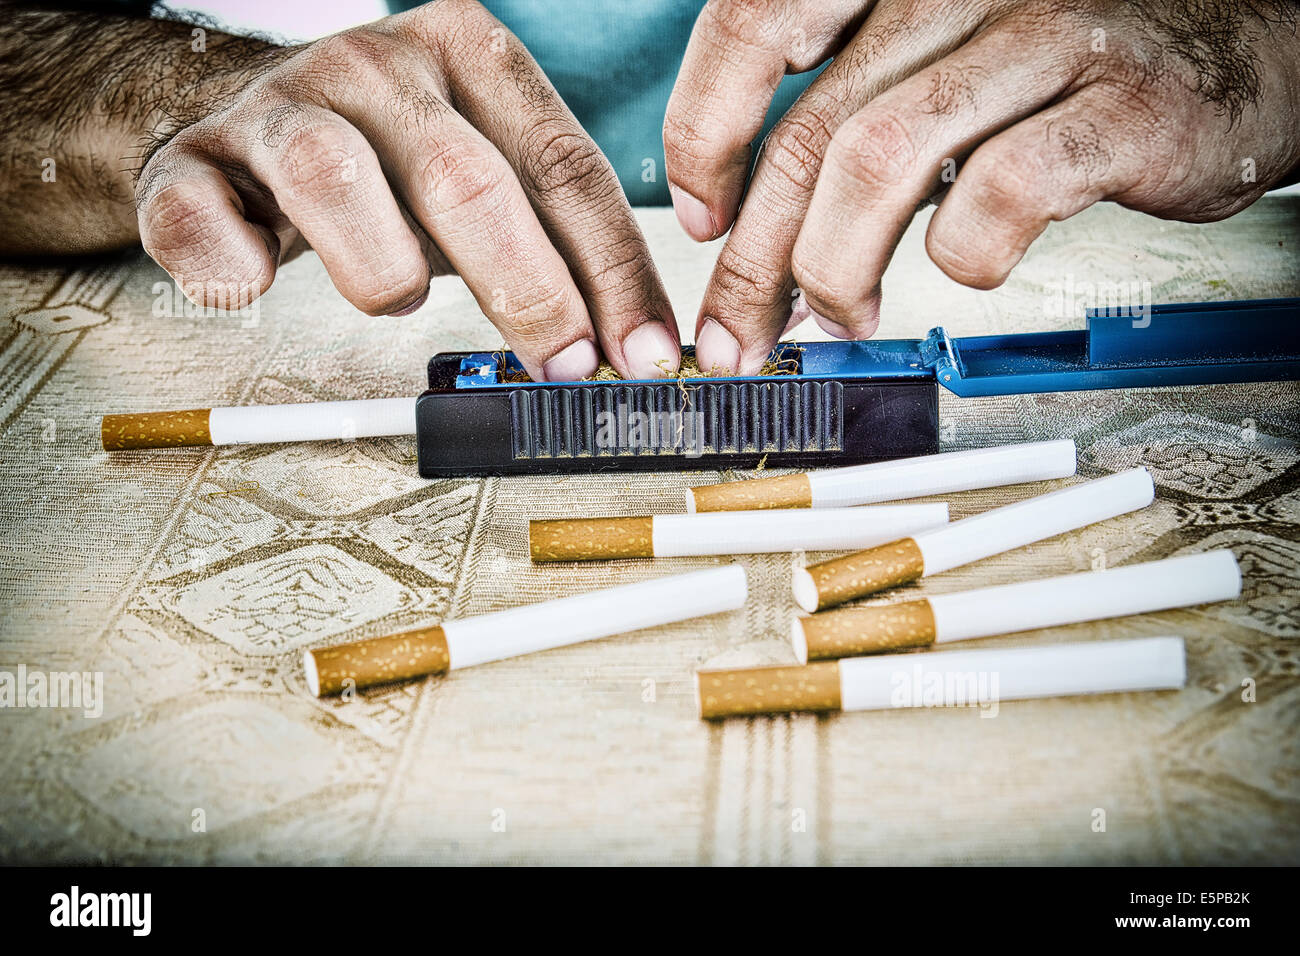 Hands of man making cigarettes preparing to smoke cigars with tobacco and filters Stock Photo